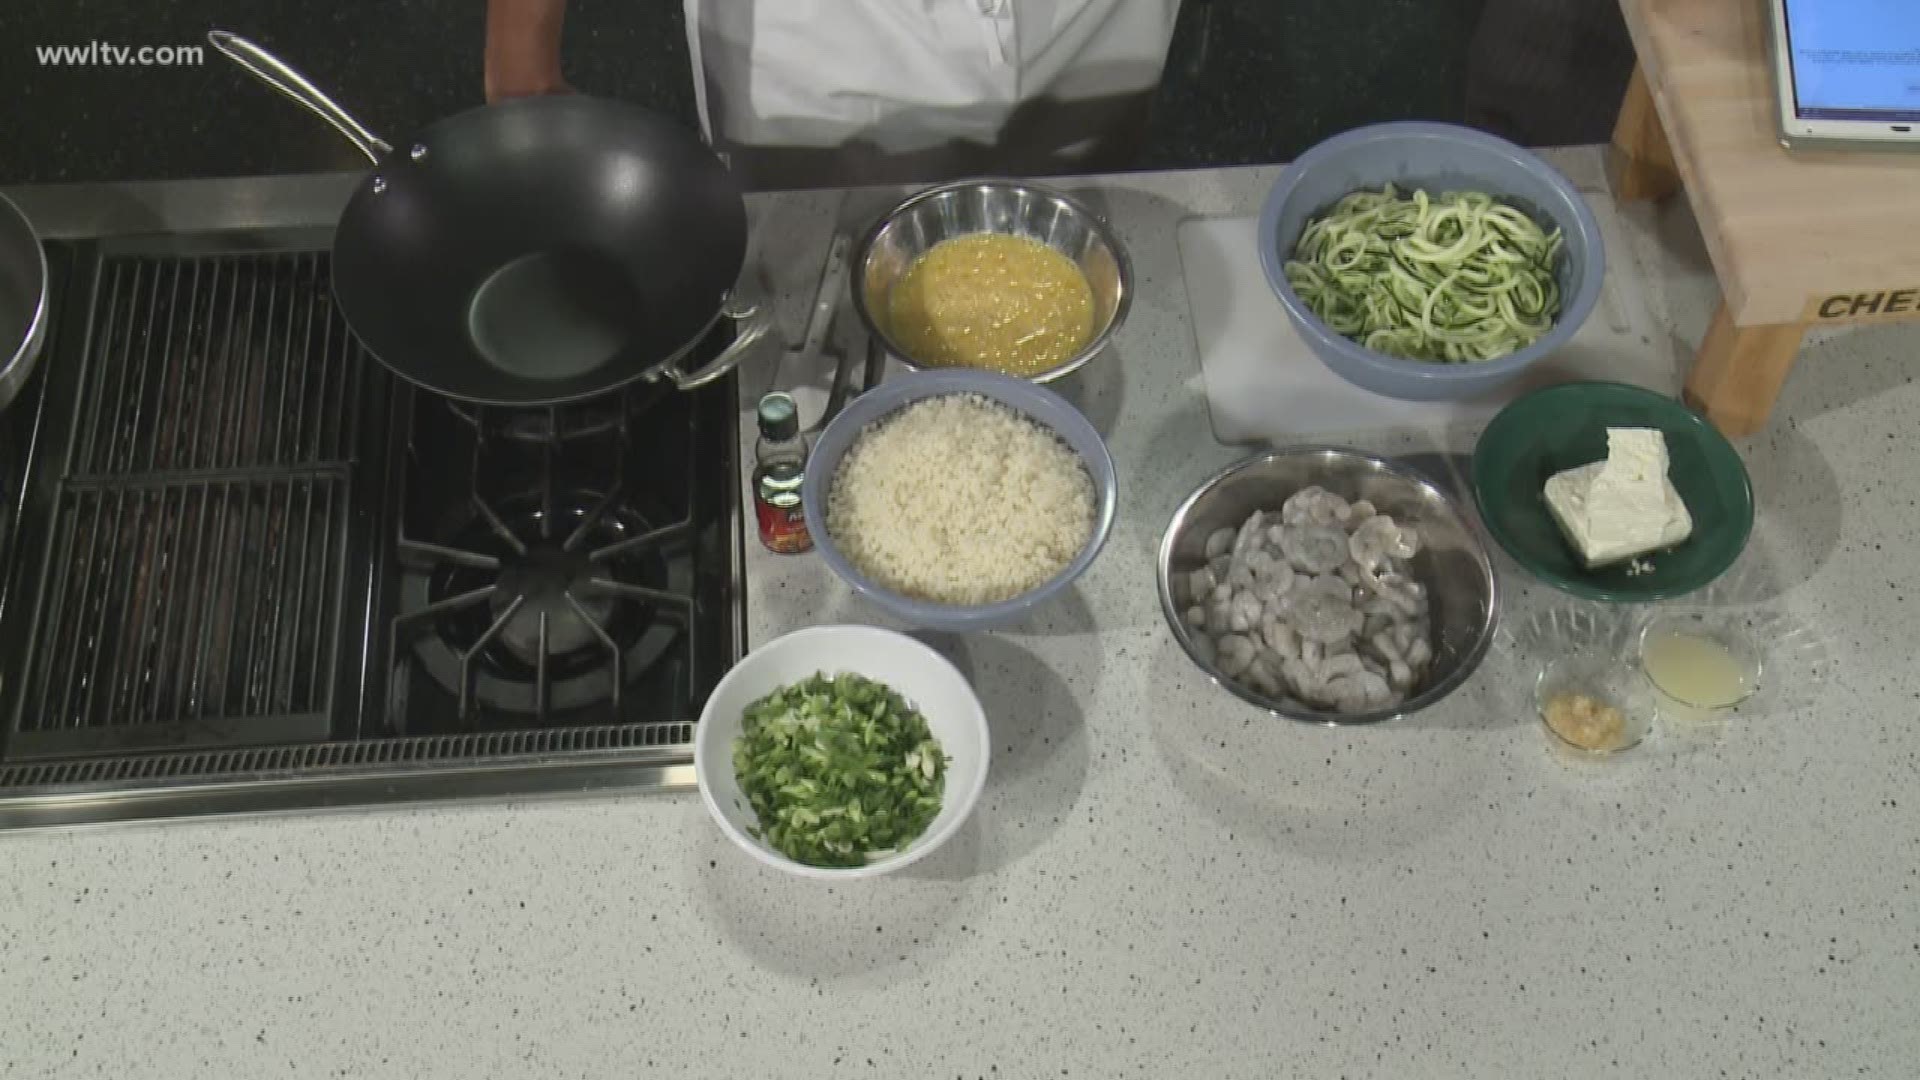 Chef Kevin and Eric are preparing the 5 ingredients needed to make some quick and simple meals.